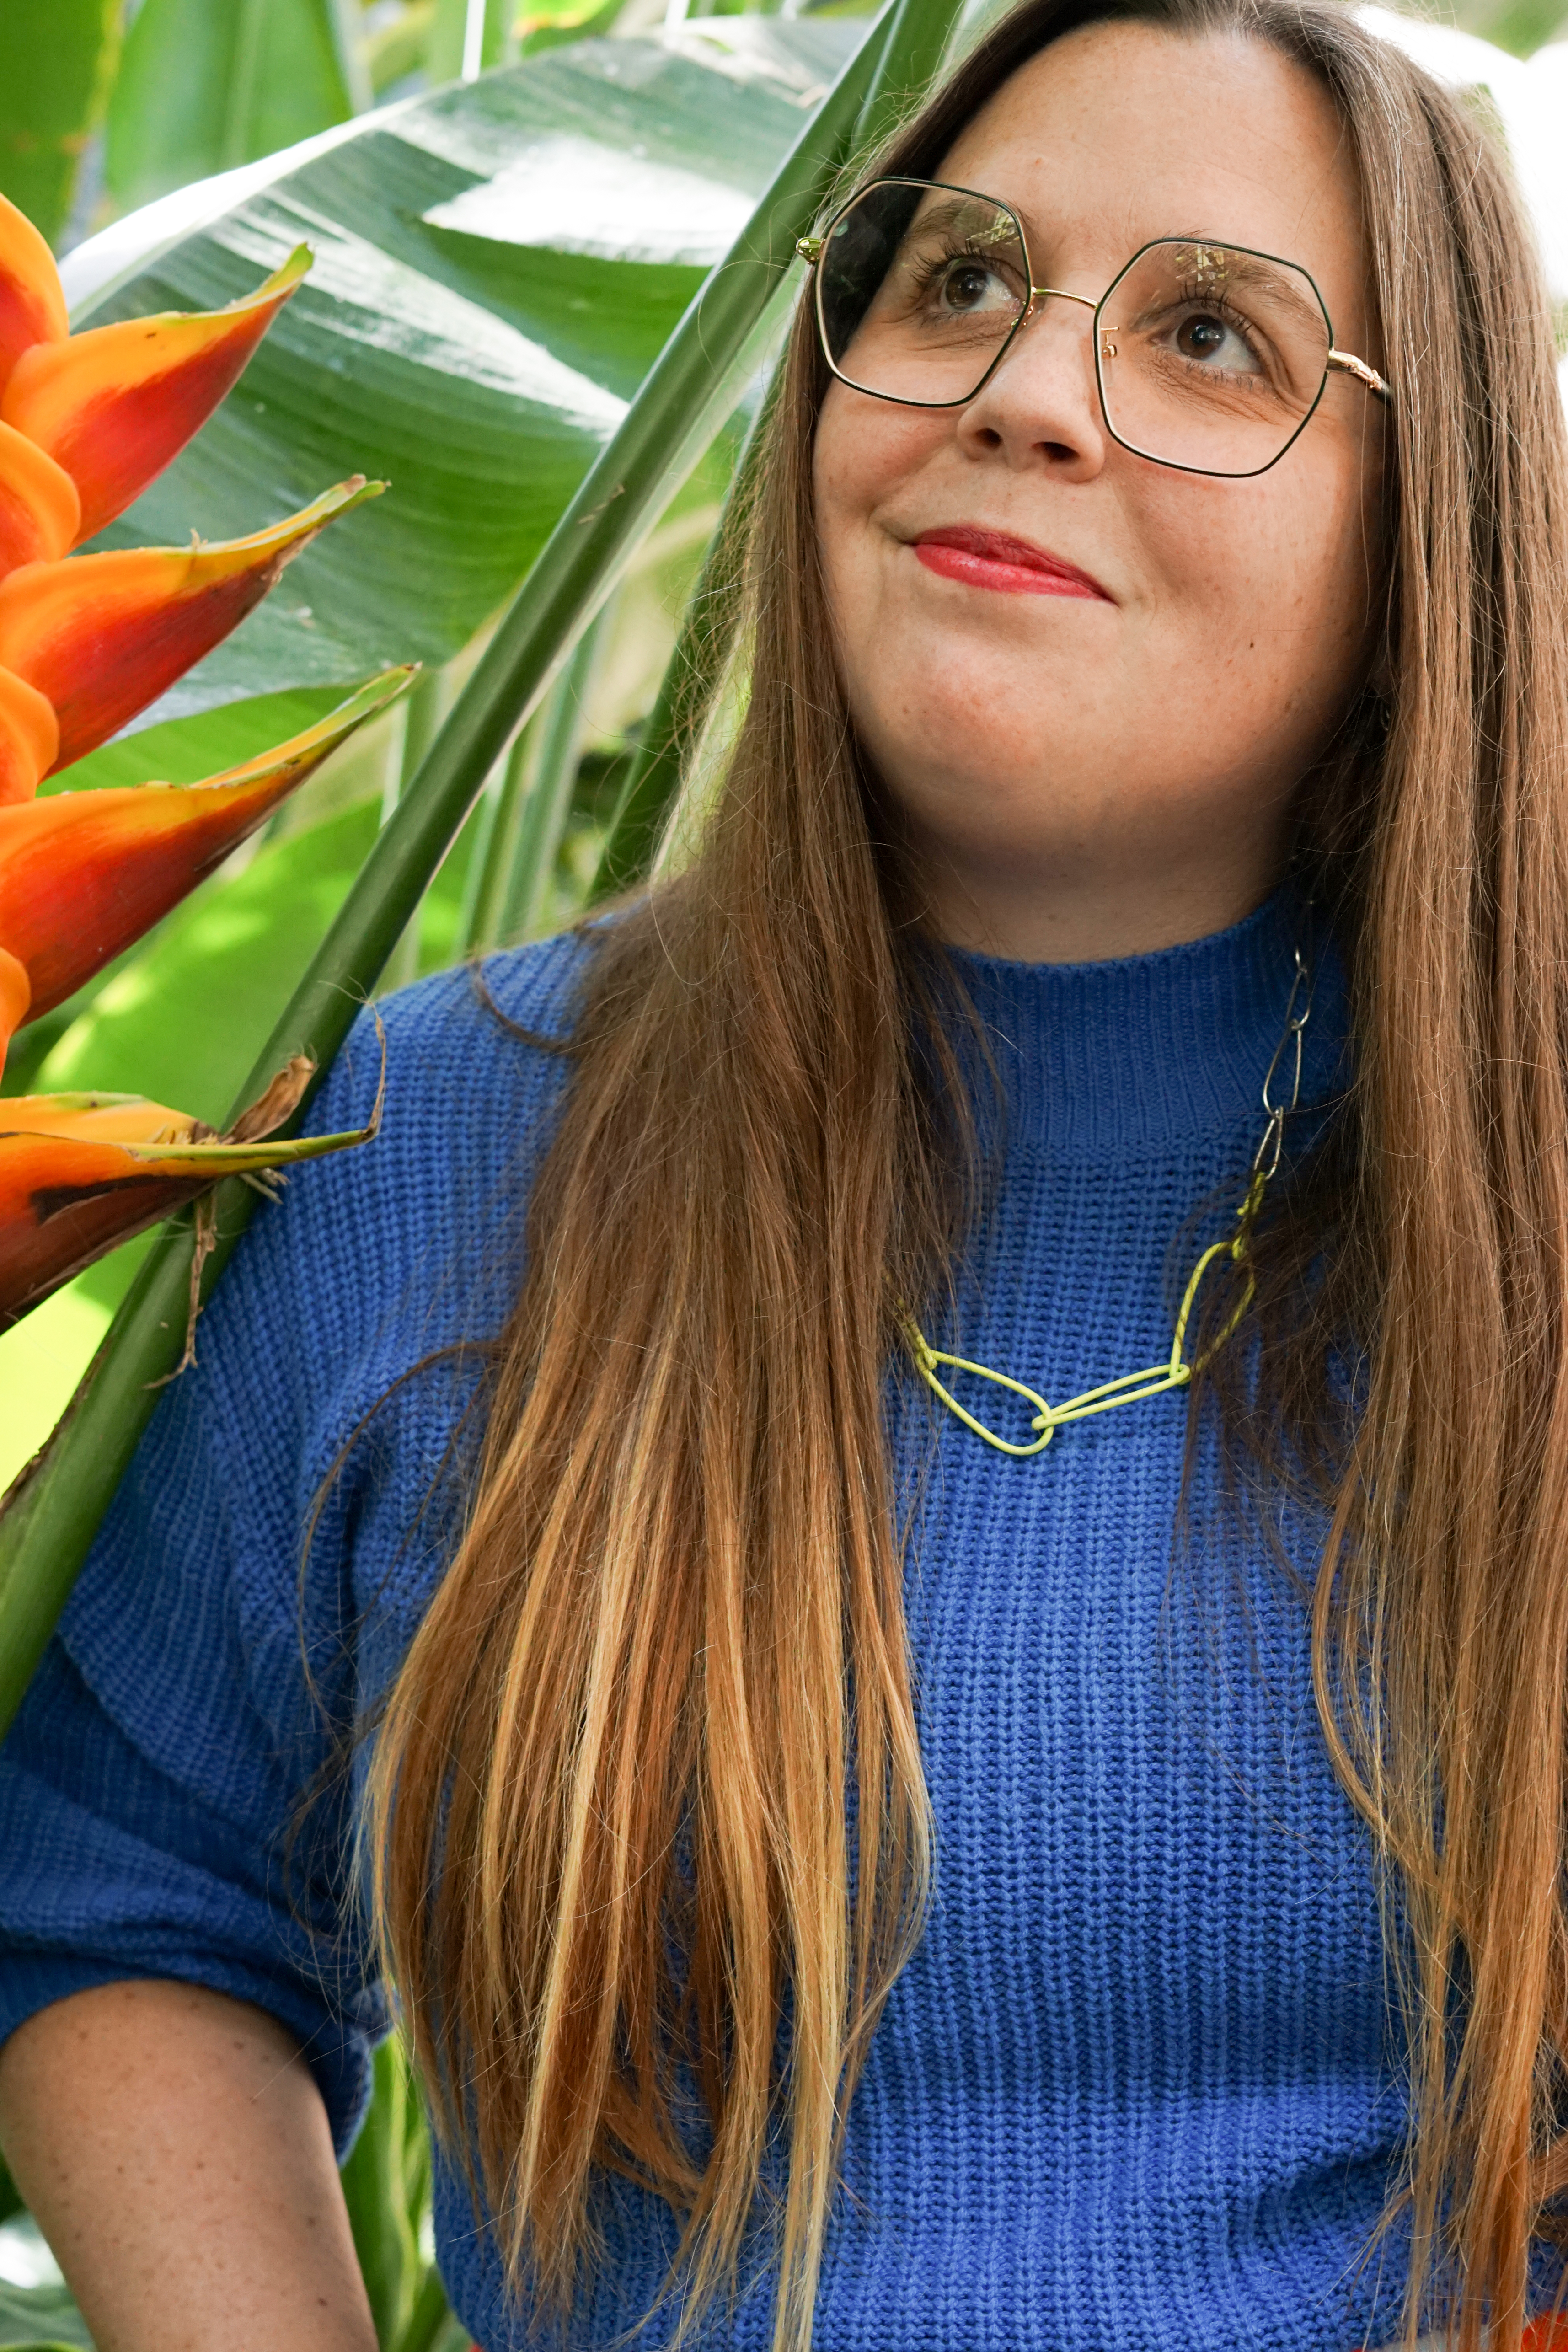 self-portrait in garden with bird of paradise plant, neon necklace, blue sweater, and marimekko skirt